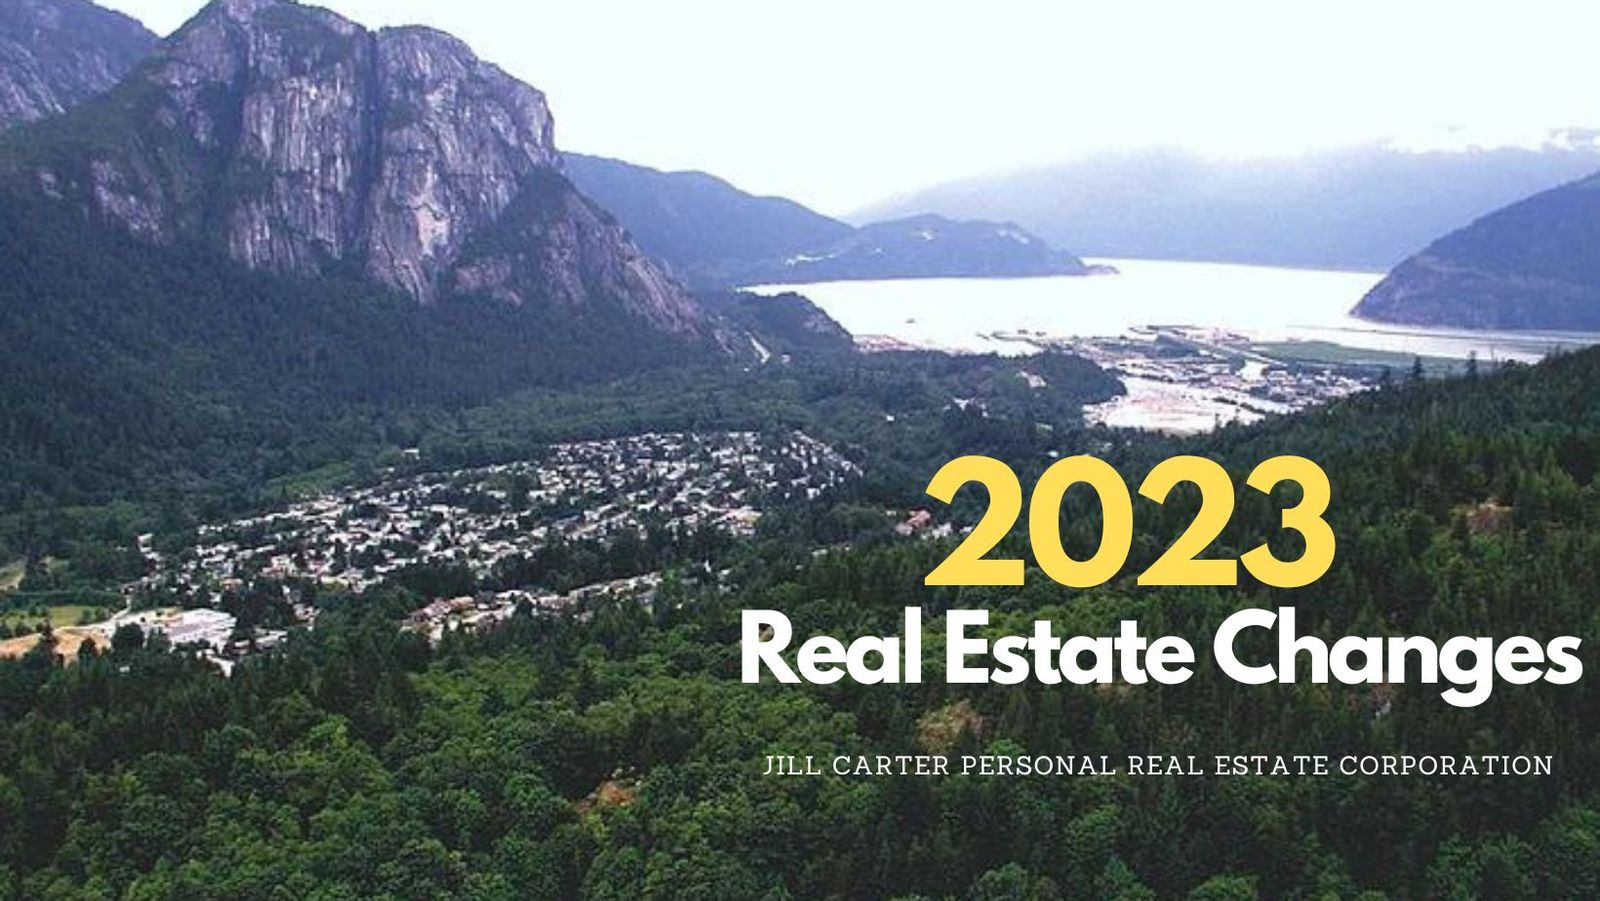 2023 Changes to Real Estate that you should be aware of